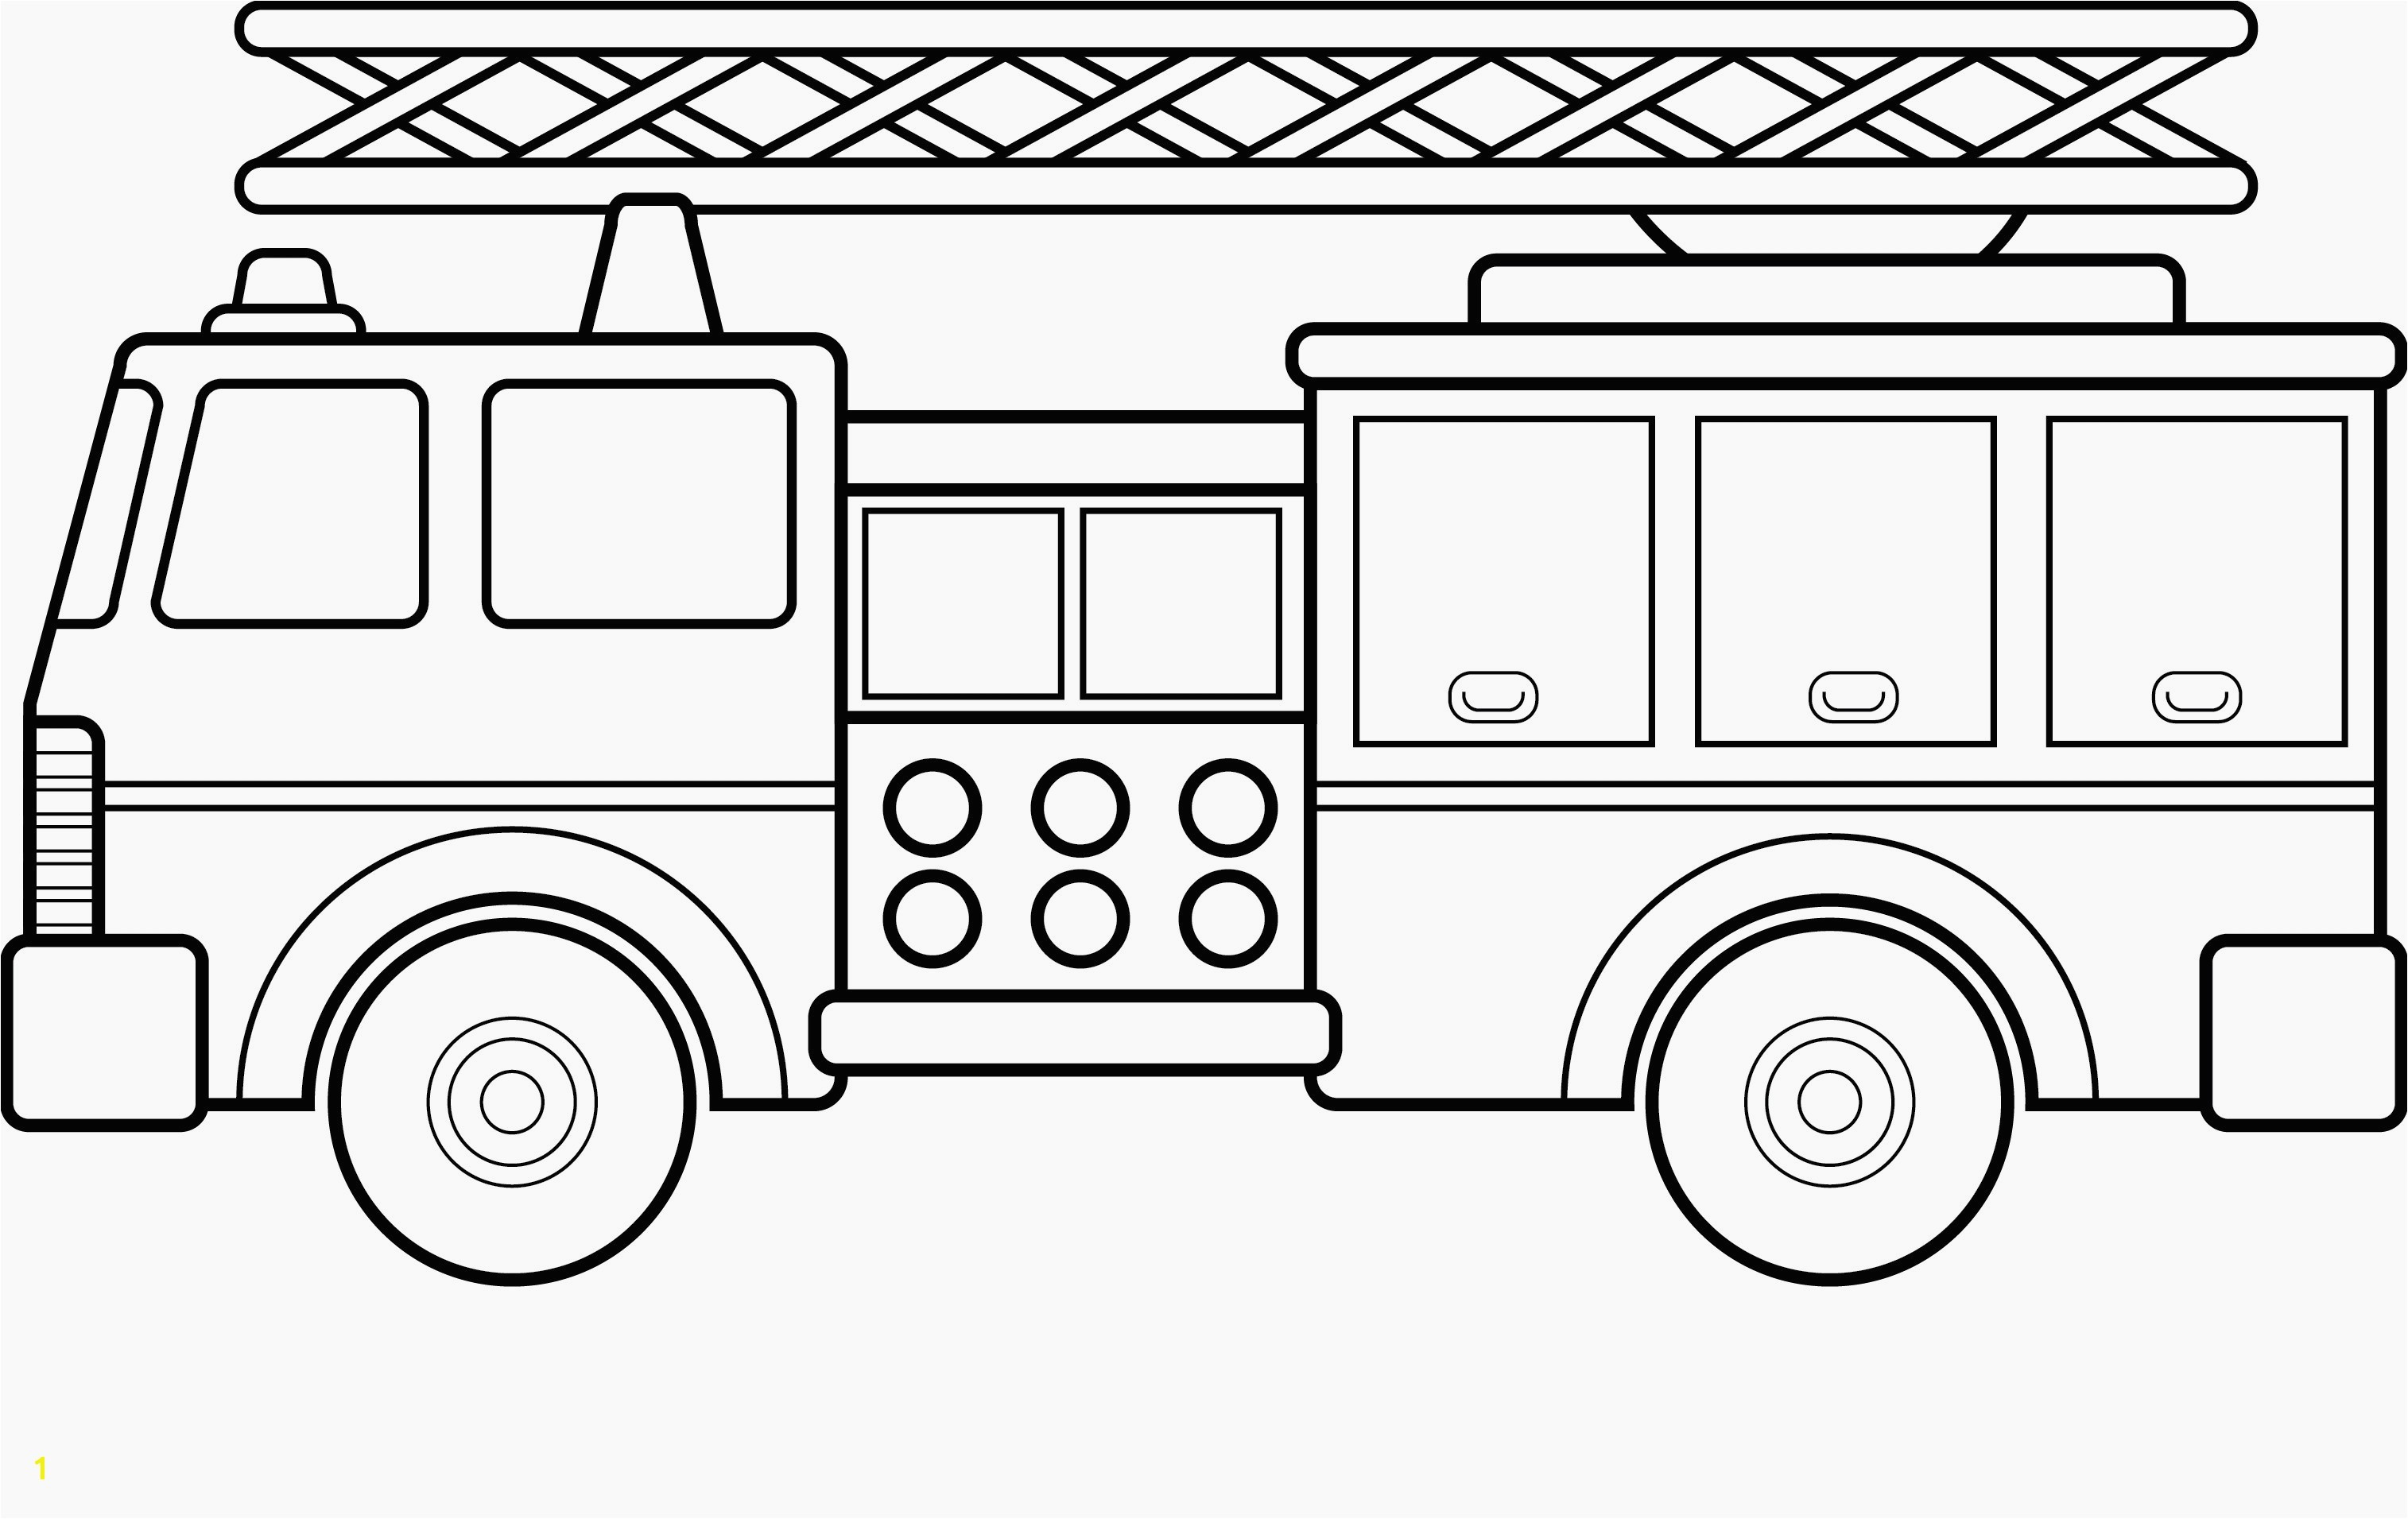 Simple Fire Truck Coloring Page 12 Luxury Fire Truck Coloring Page